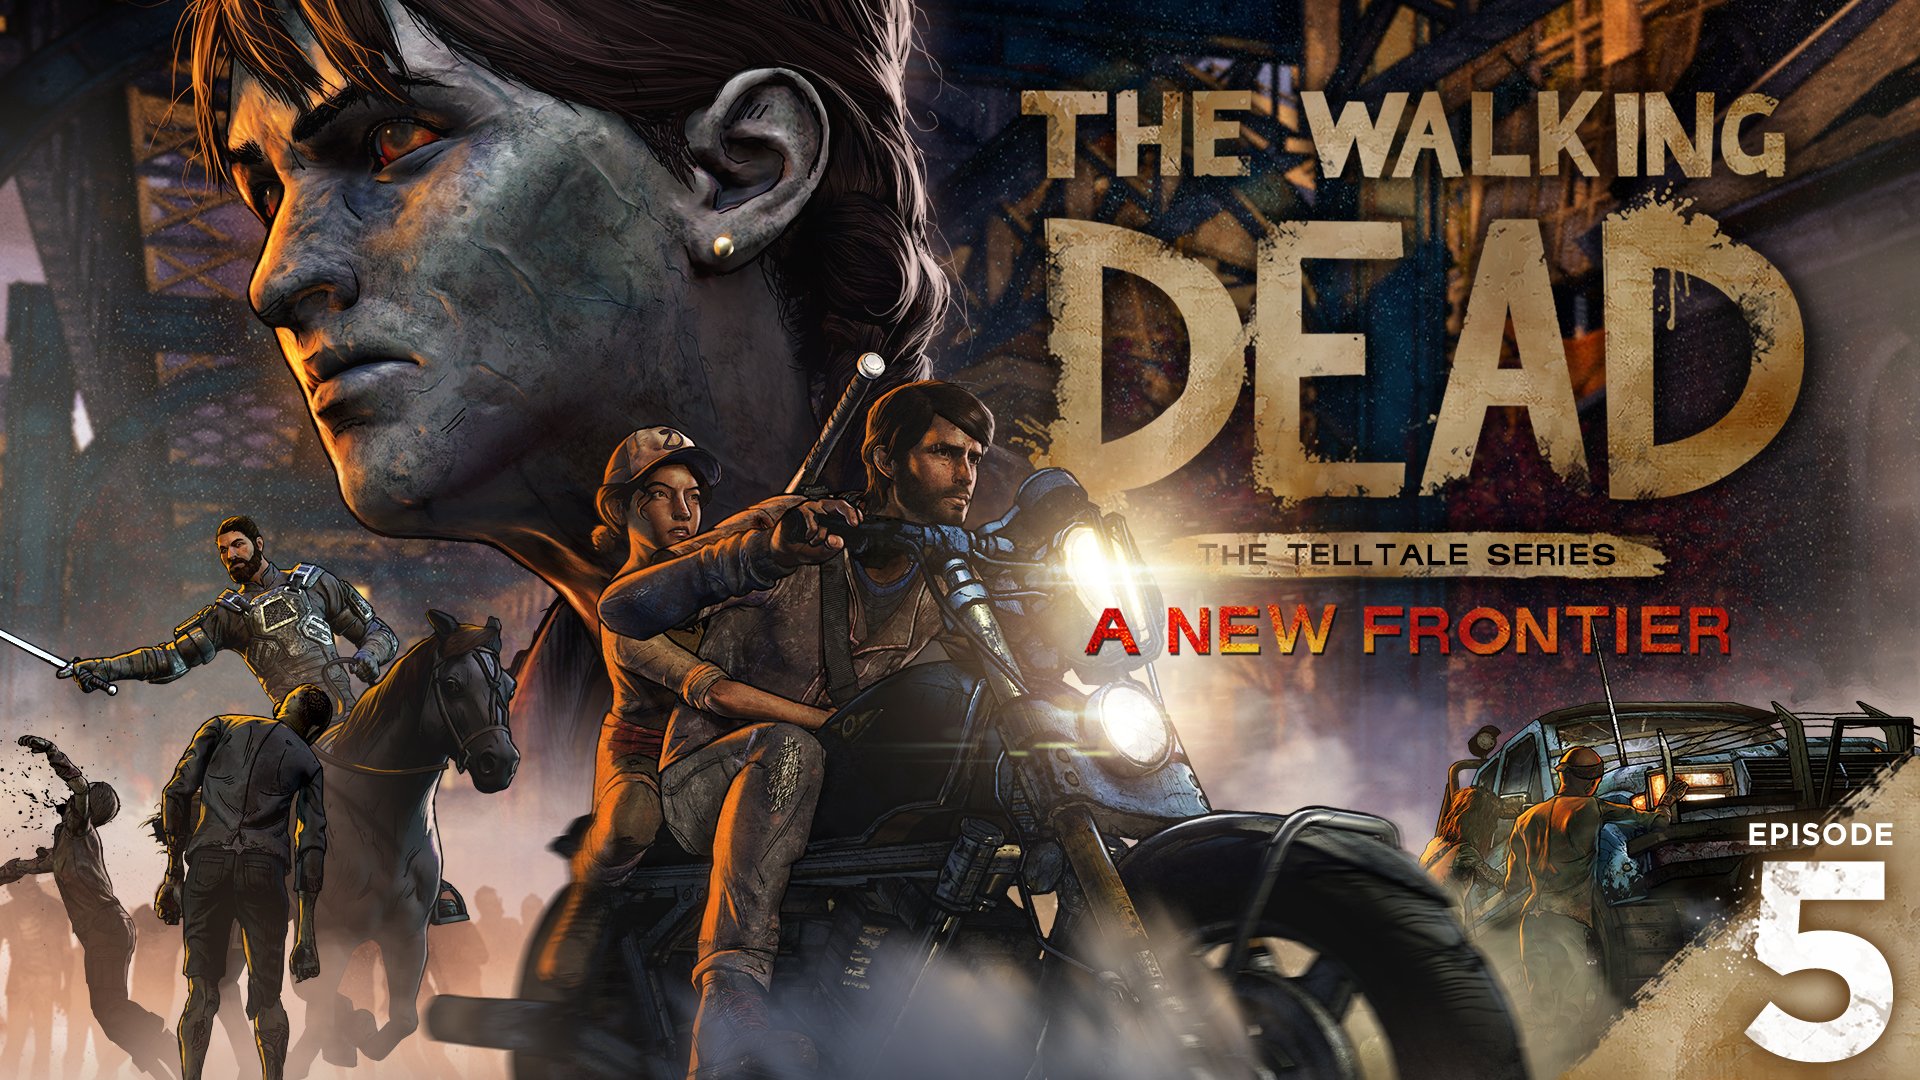 The Walking Dead - A New Frontier: Episode 5 - From the Gallows, постер № 1